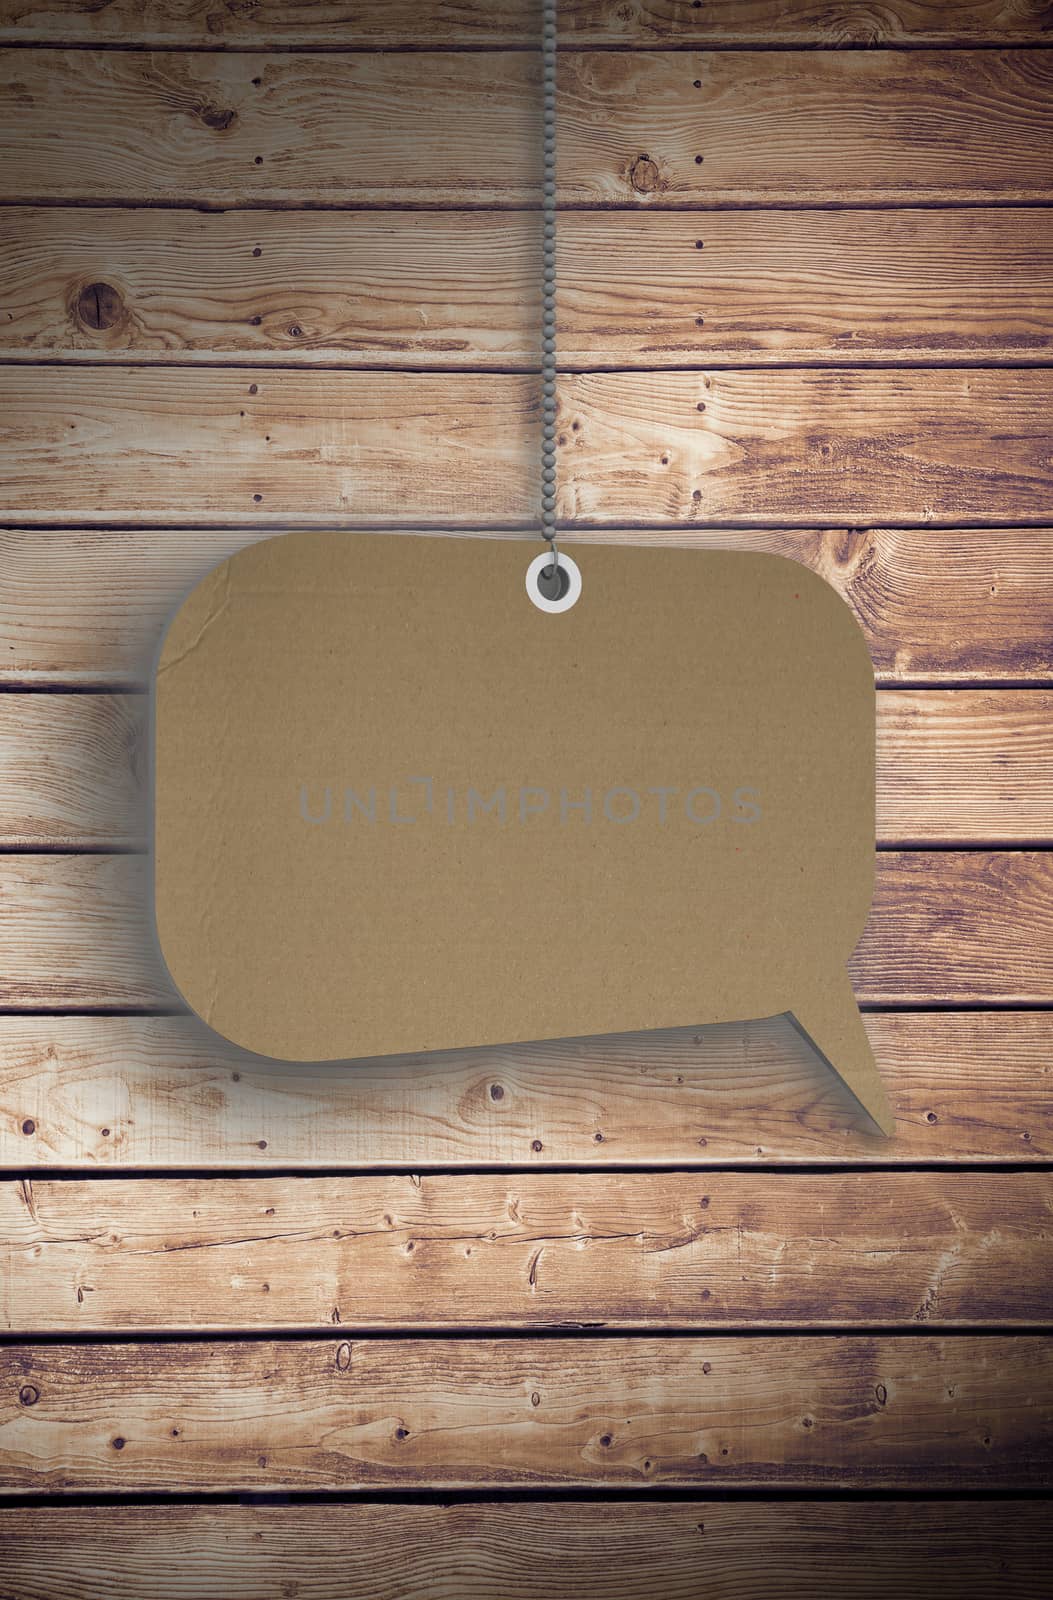 Speech bubble tag hanging against wooden planks background